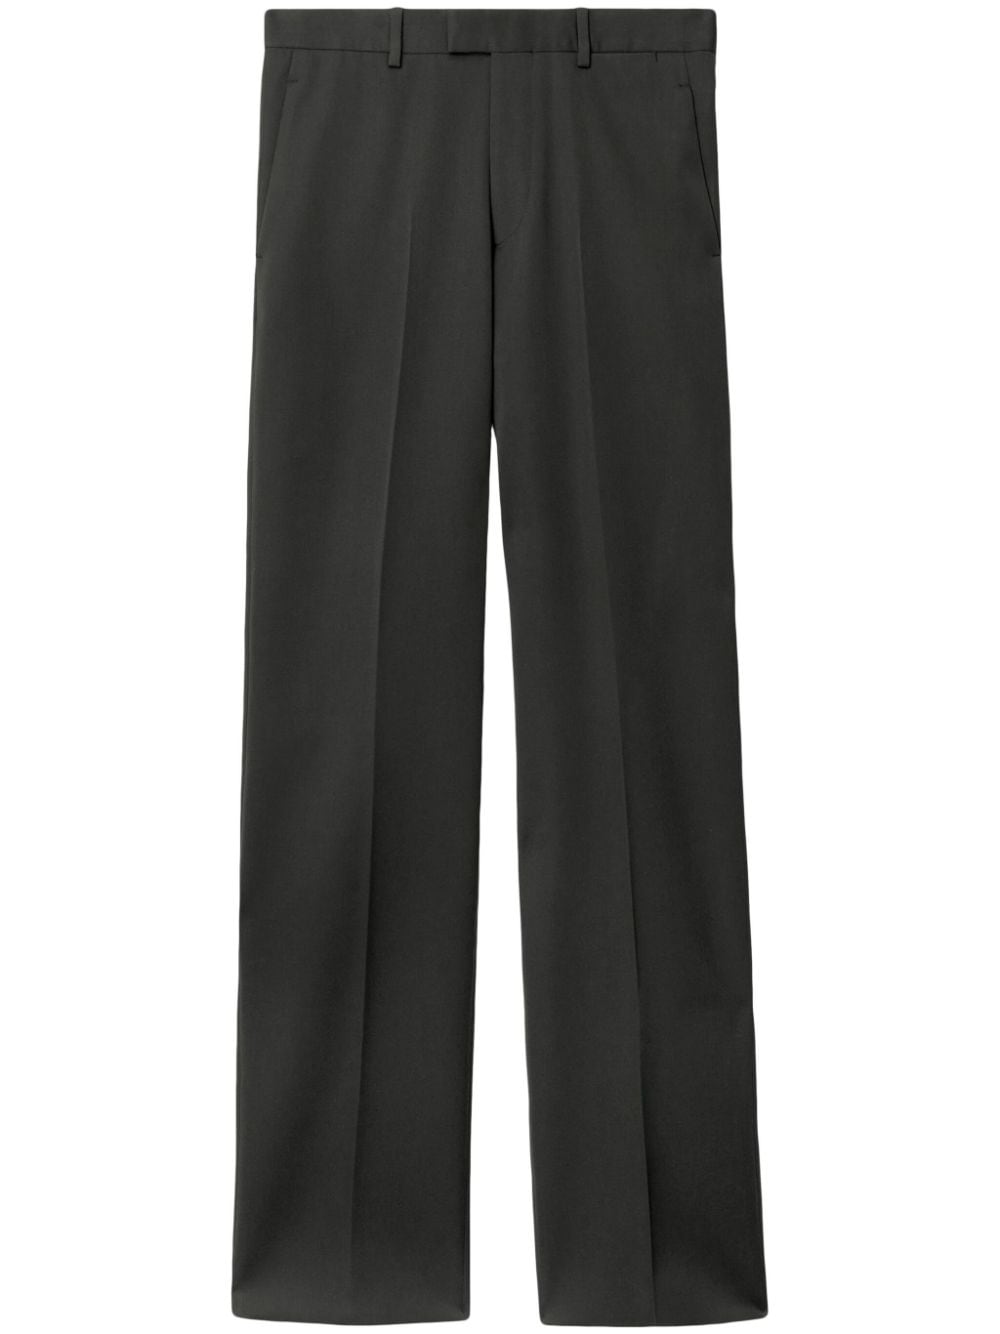 BURBERRY WOOL TAILORED TROUSERS